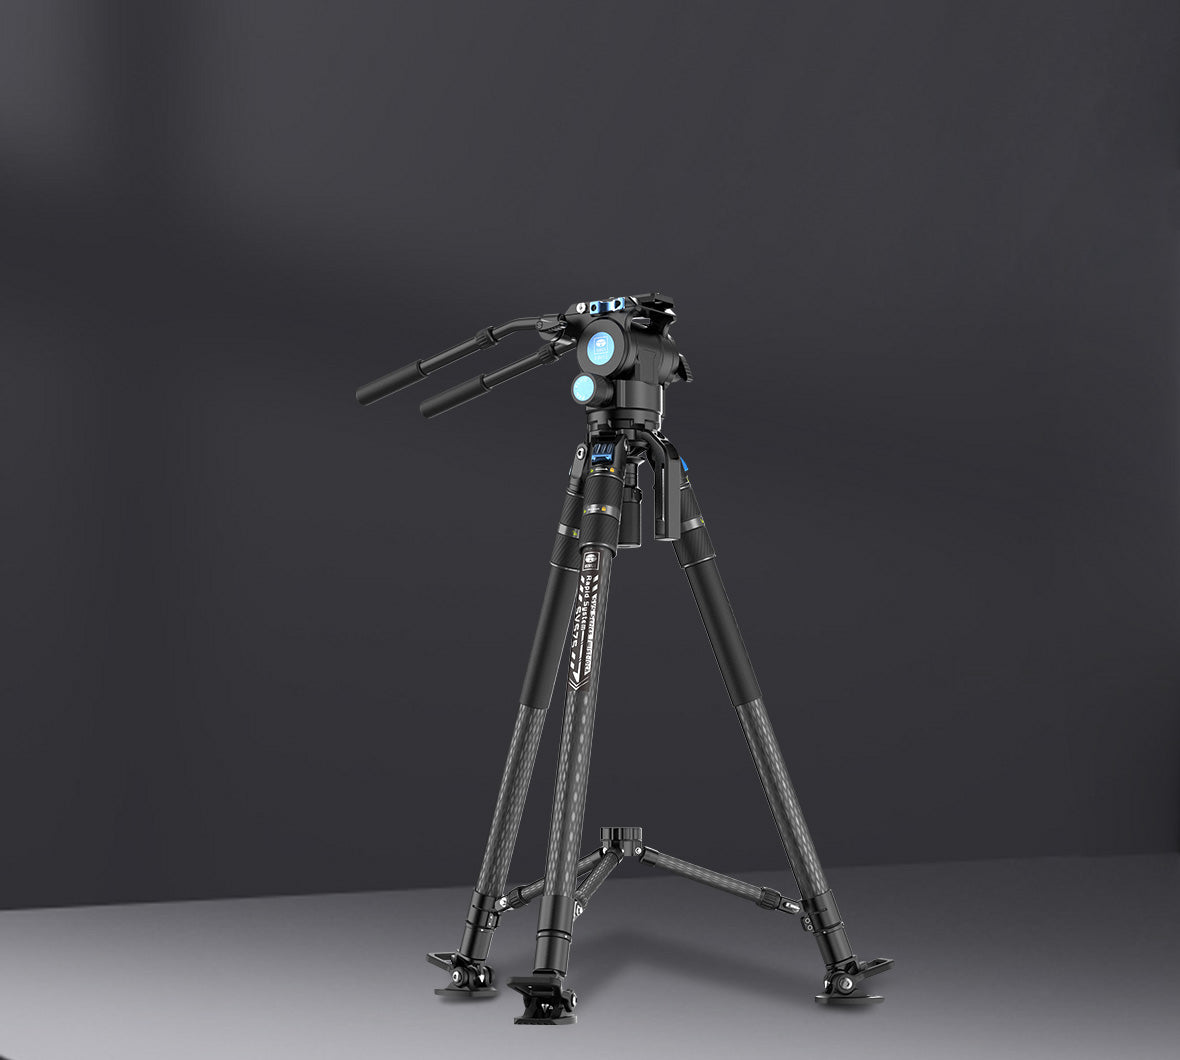 The SVS75 Rapid System One-Step Height Adjustable Video Tripod features 6 patents and is the professional tripod kit for high quality video creation.